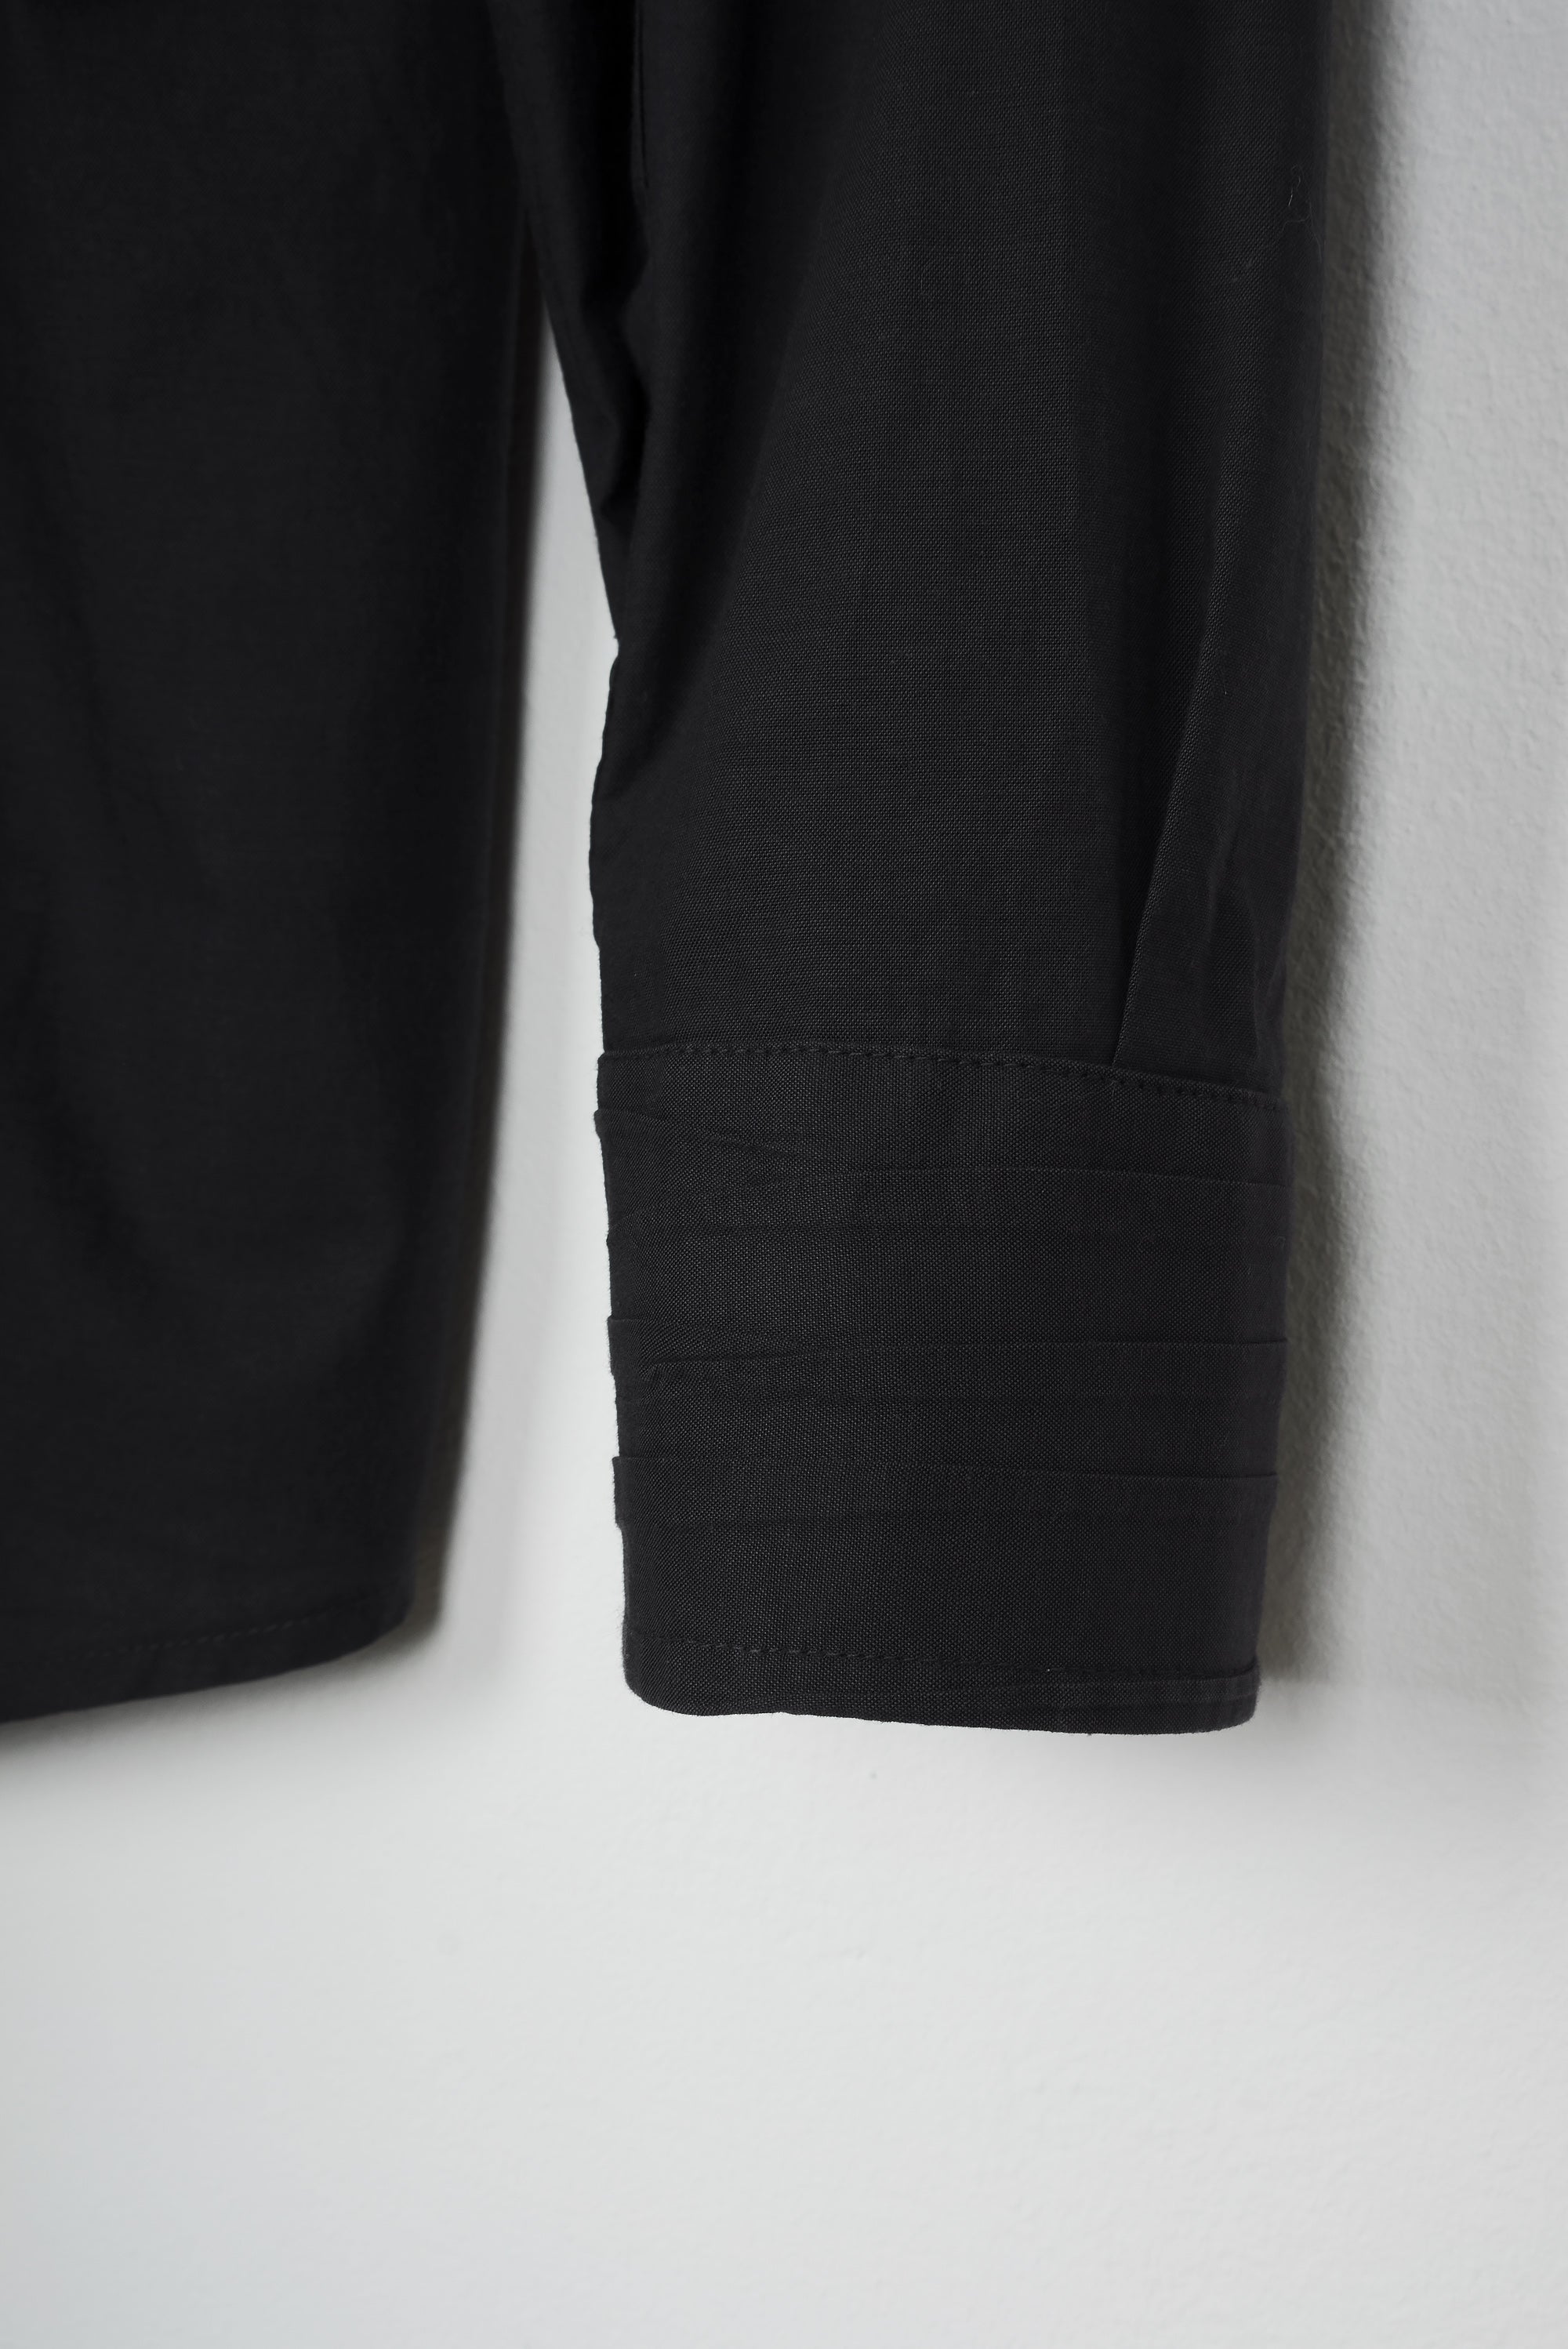 2005 A/W BLACK SHIRT WITH EXCESS FABRIC DETAIL